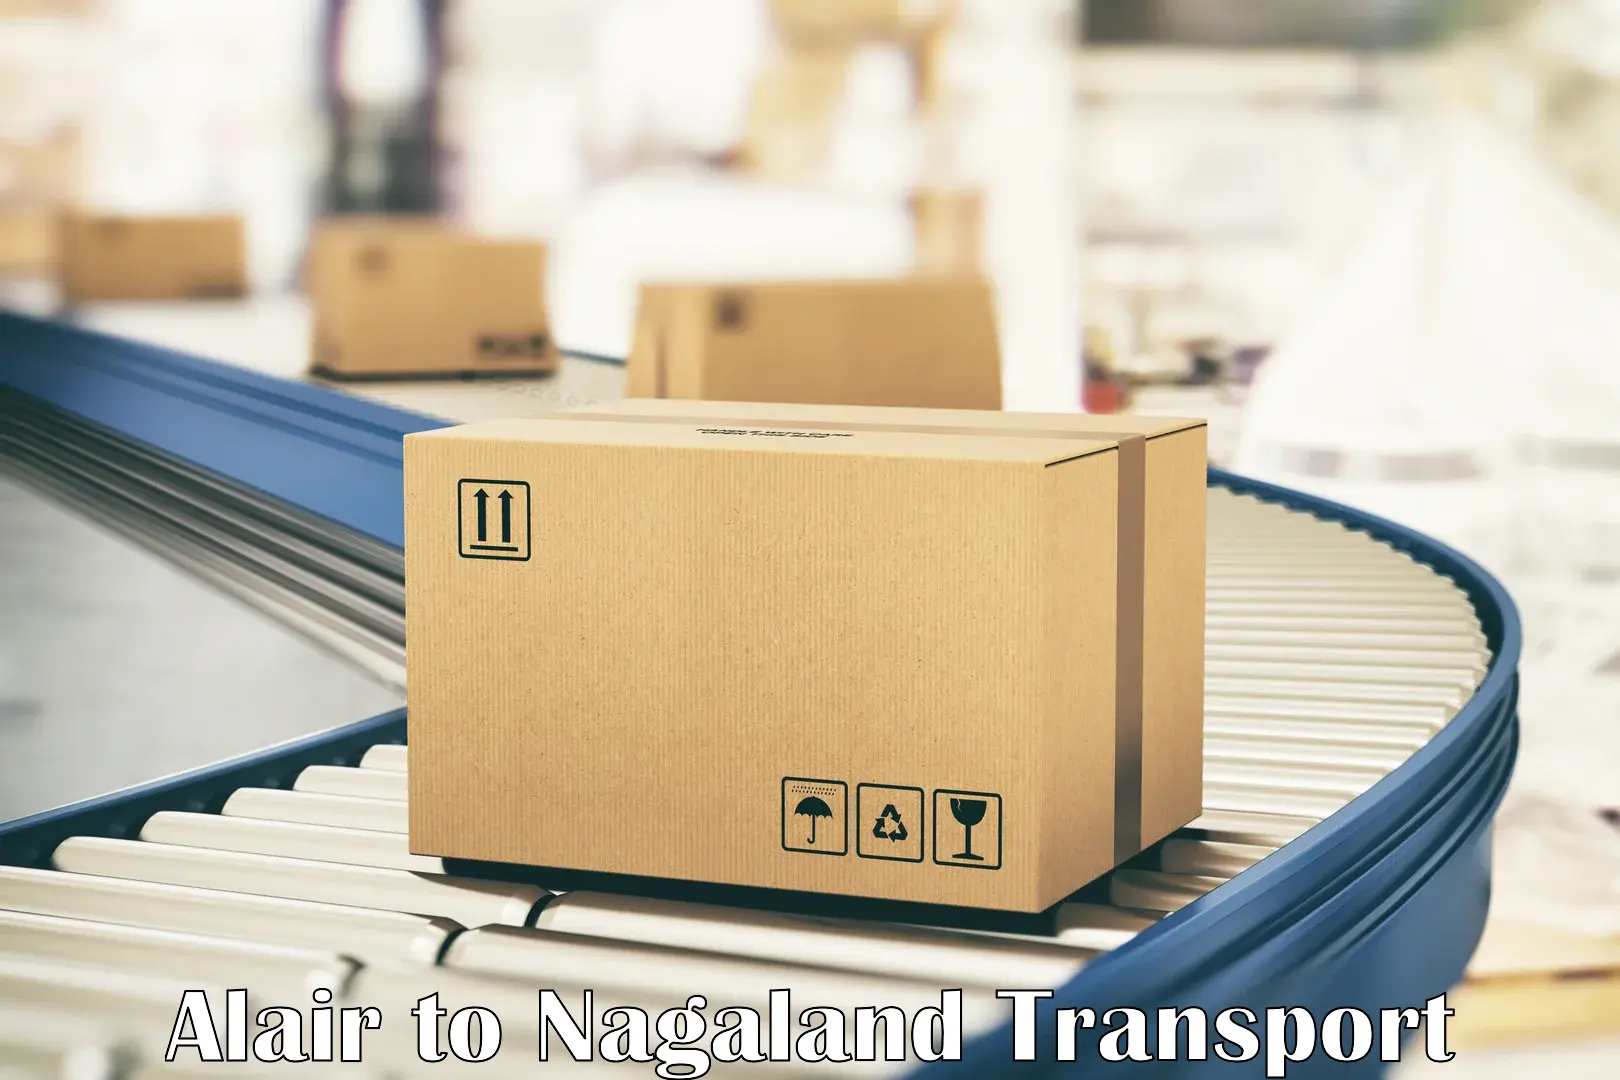 Express transport services in Alair to Nagaland